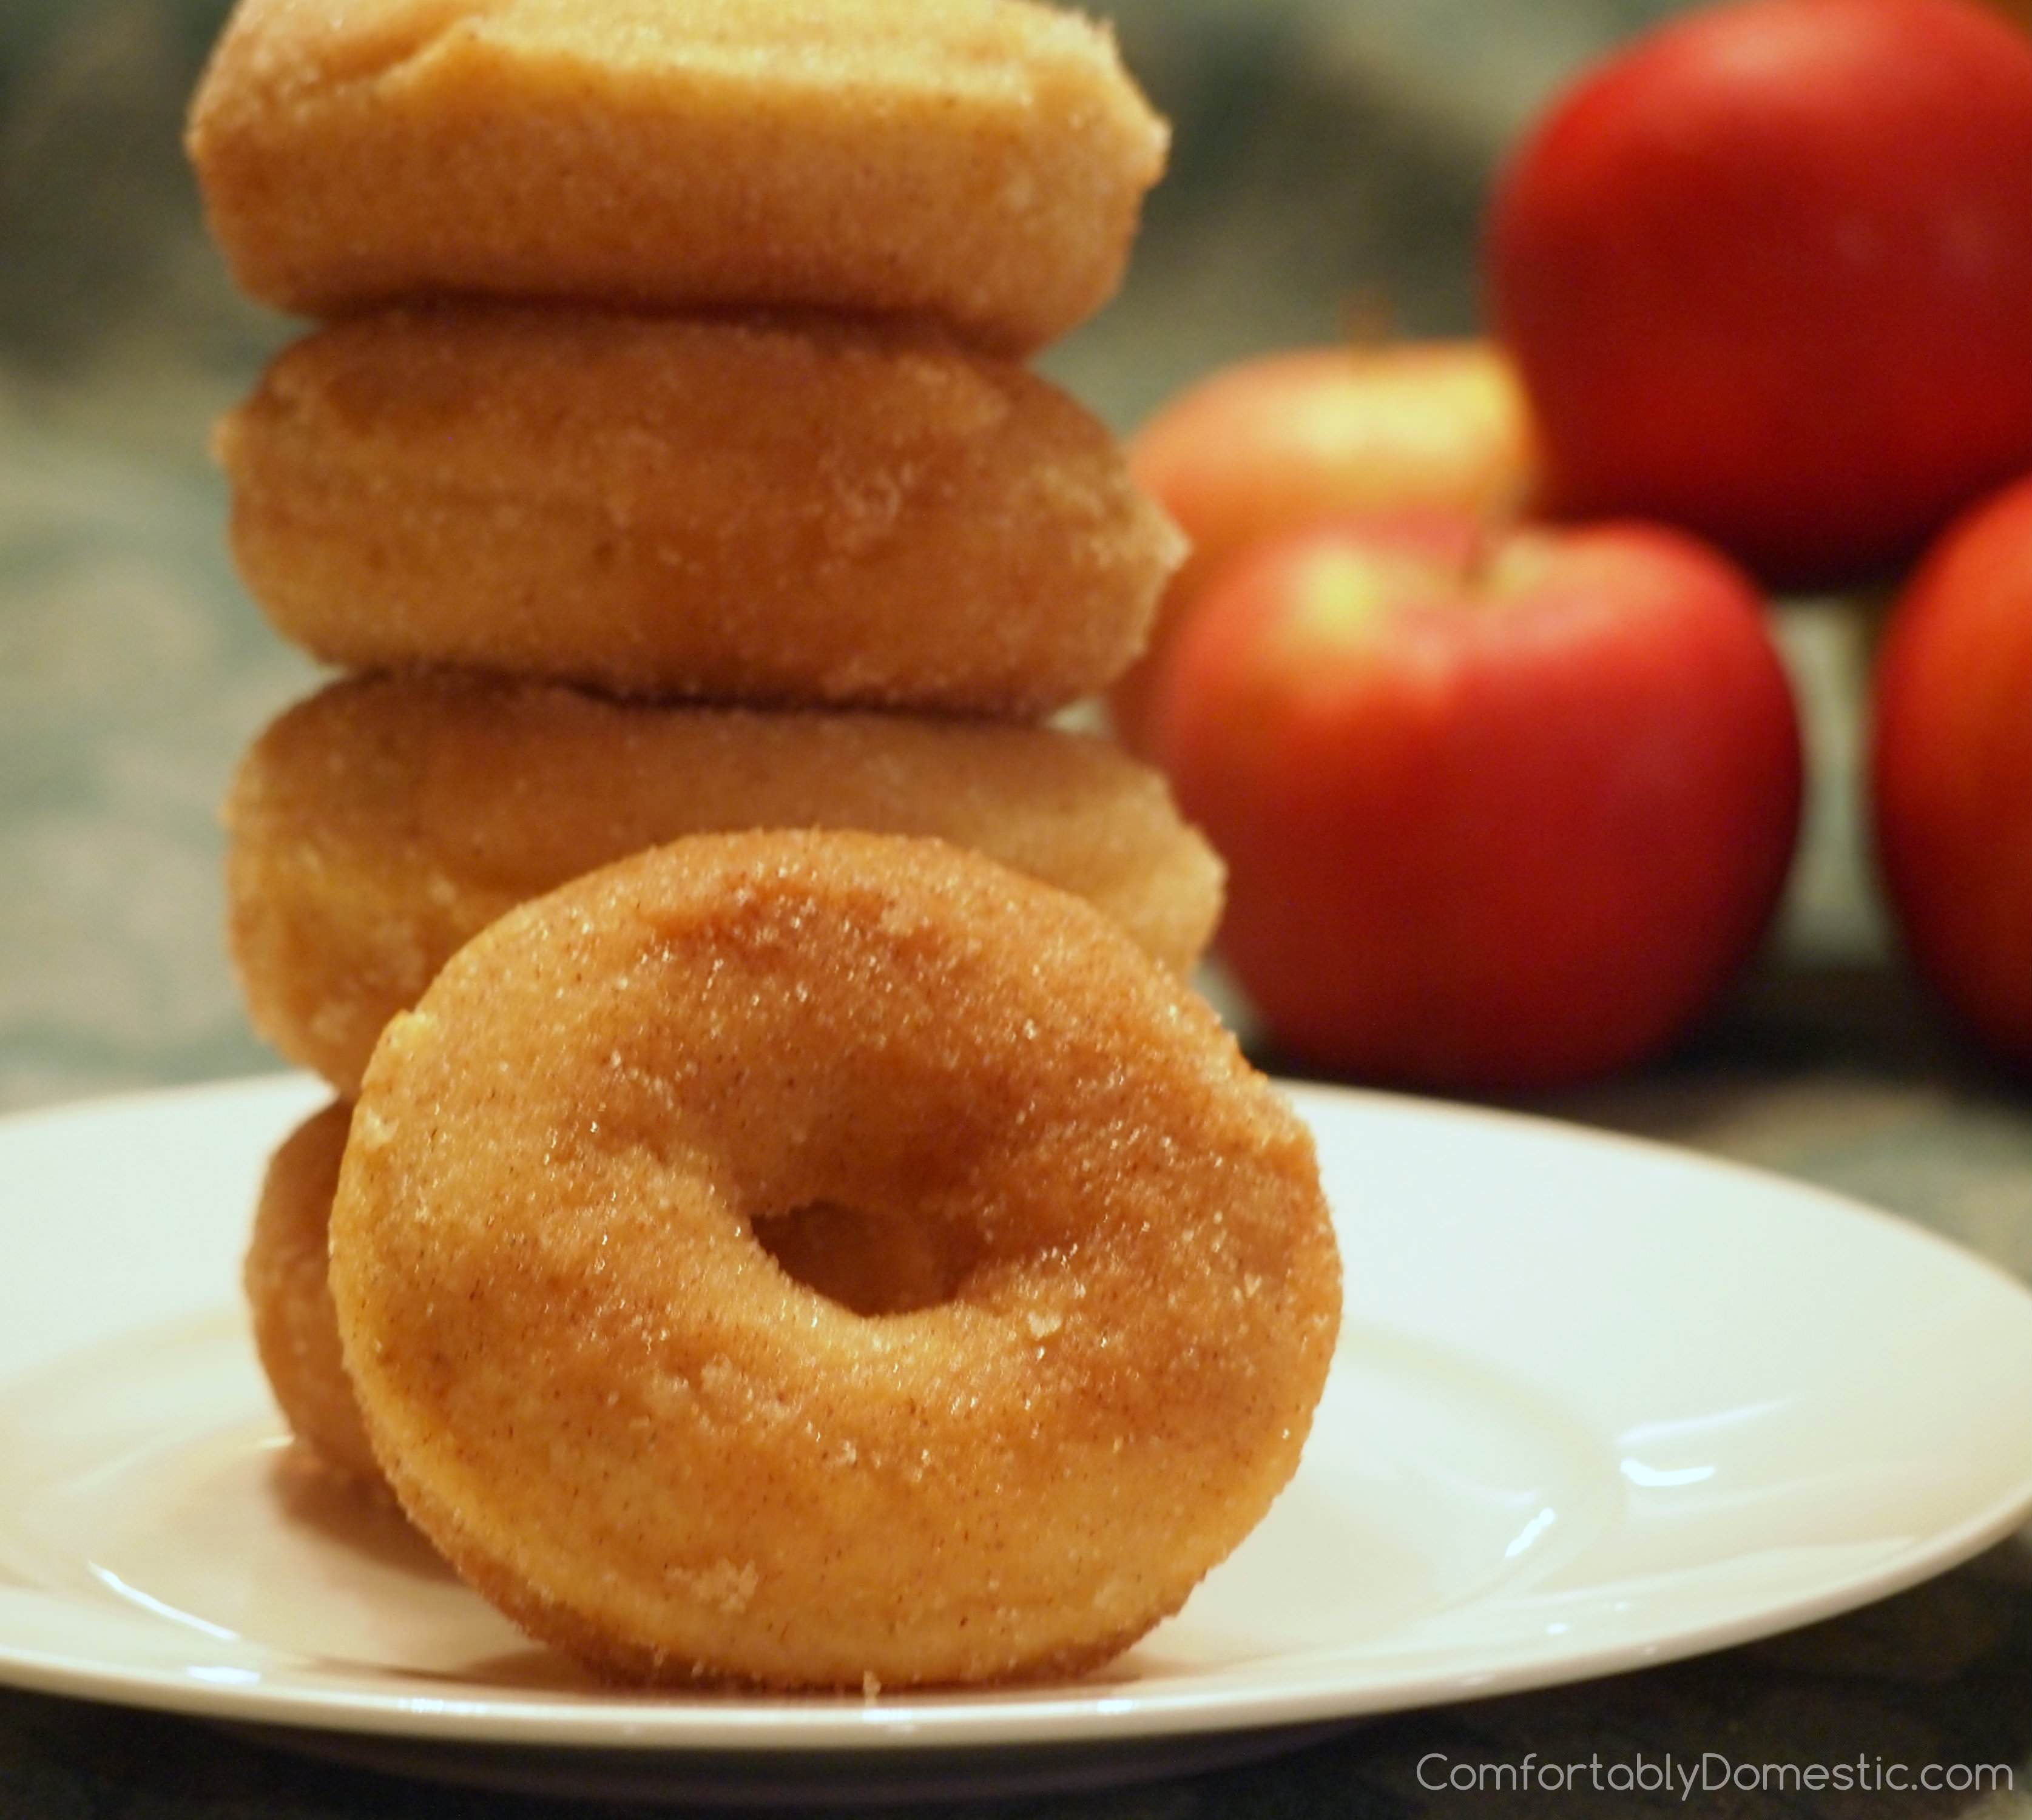 Baked Apple Cinnamon Doughnuts | ComfortablyDomestic.com are soft, delicious doughnuts with fresh apples inside and a sweet cinnamon sugar coating. Recipe includes directions to make as muffins, too!